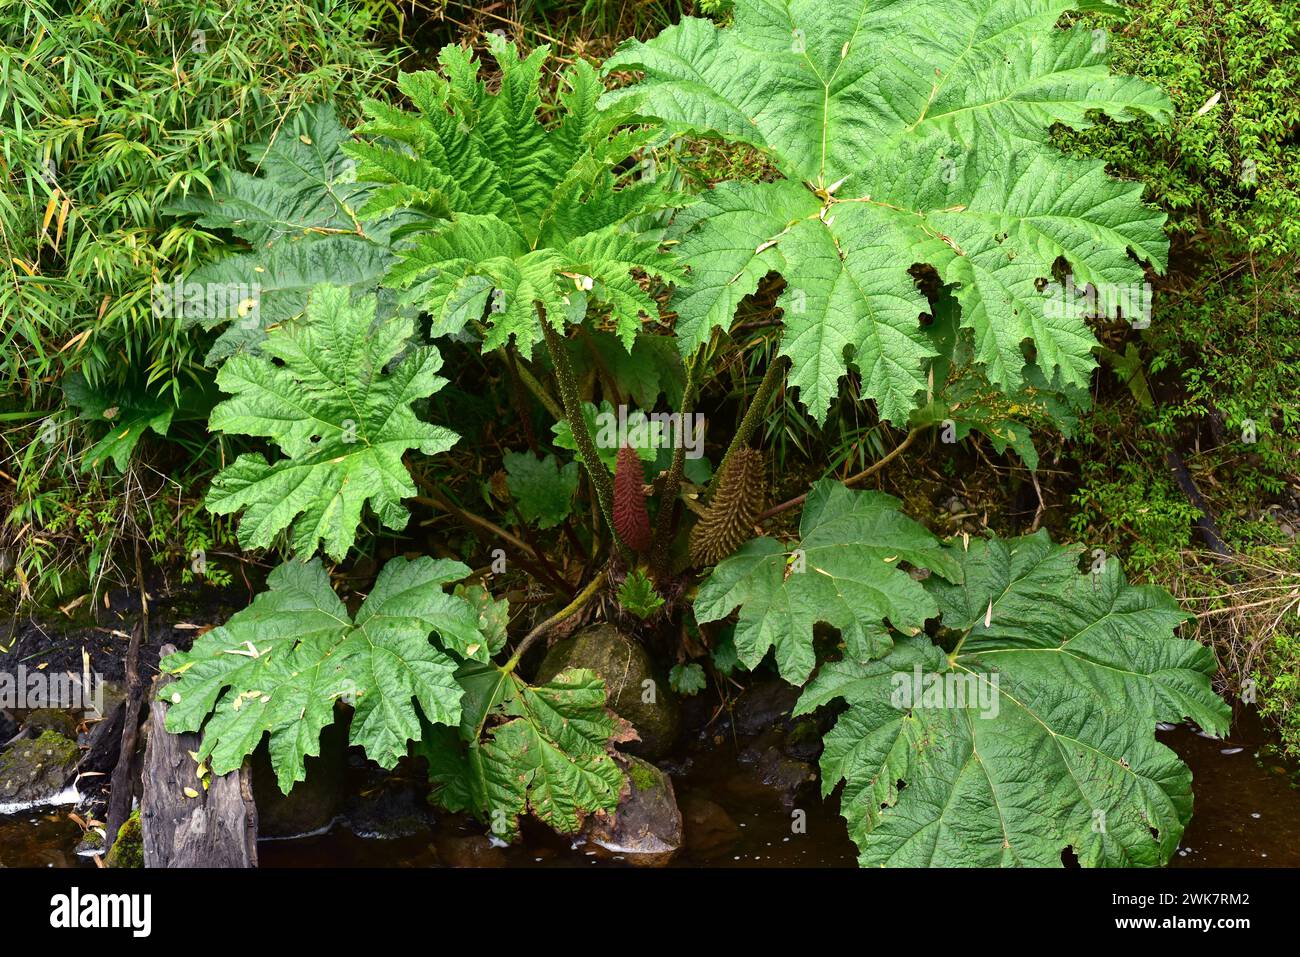 Chilean rhubarb or nalca (Gunnera tinctoria or Gunnera chilensis) is a big perennial herb native to central and southern Chile and southwestern Argent Stock Photo